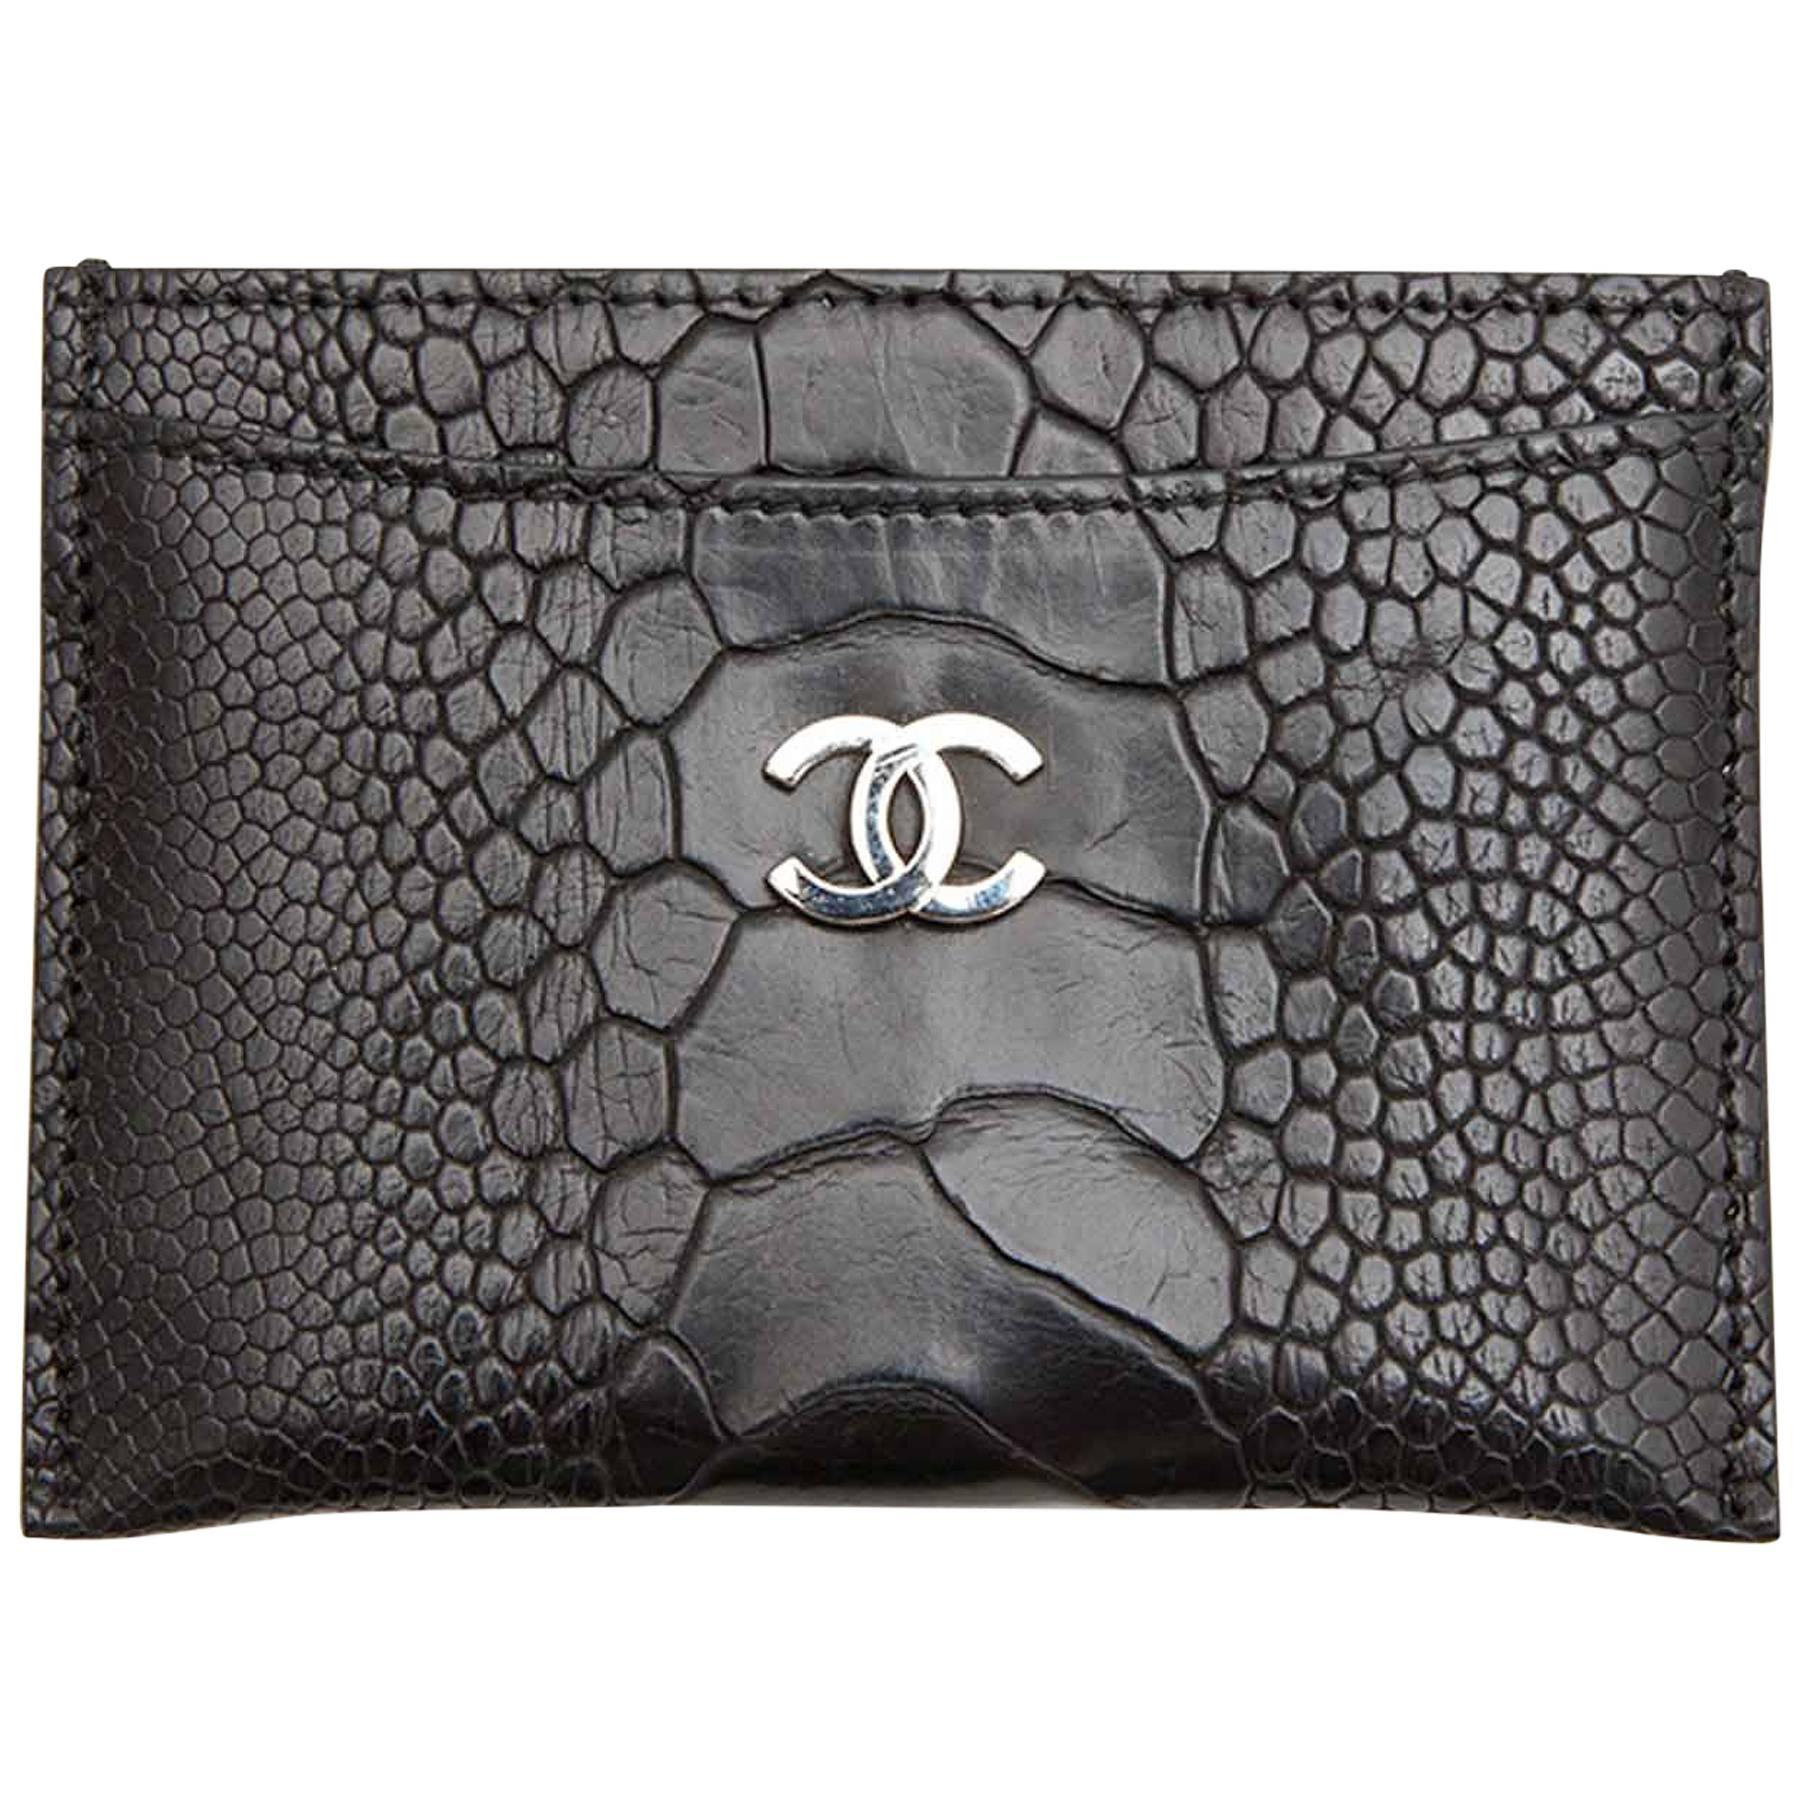 CHANEL Card Holder in Black Ostrich Leg Leather